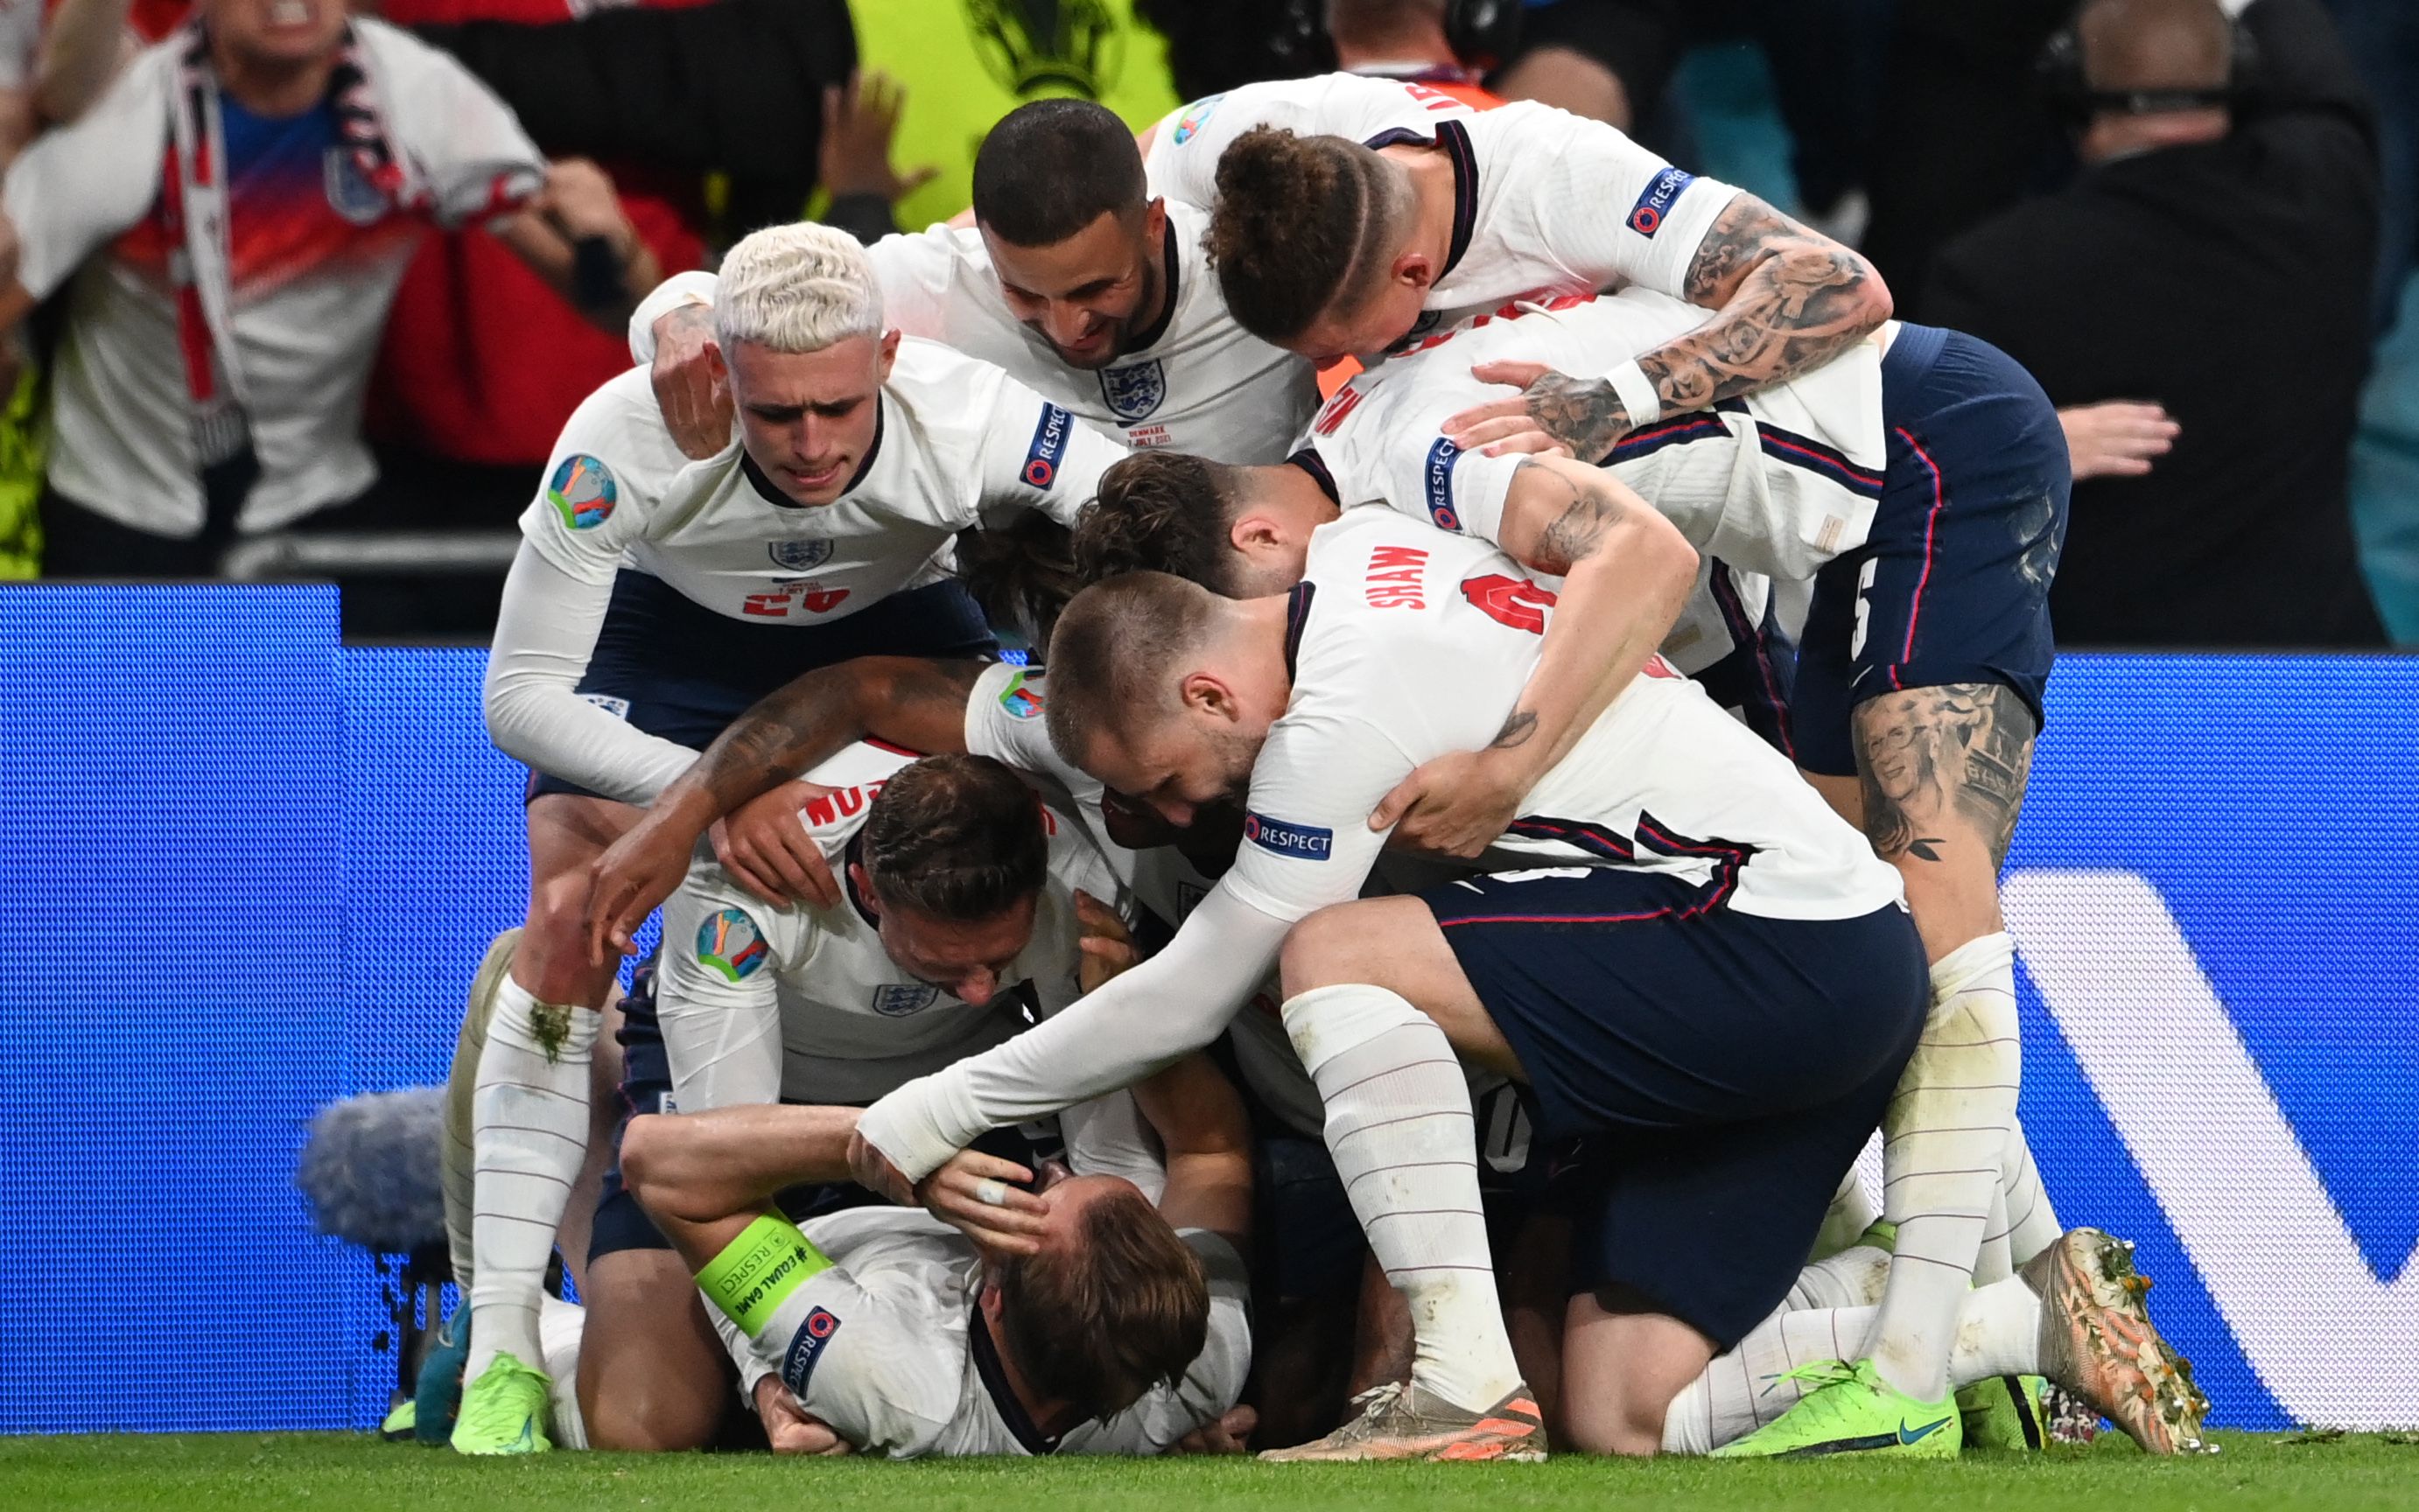 England celebrated a famous win